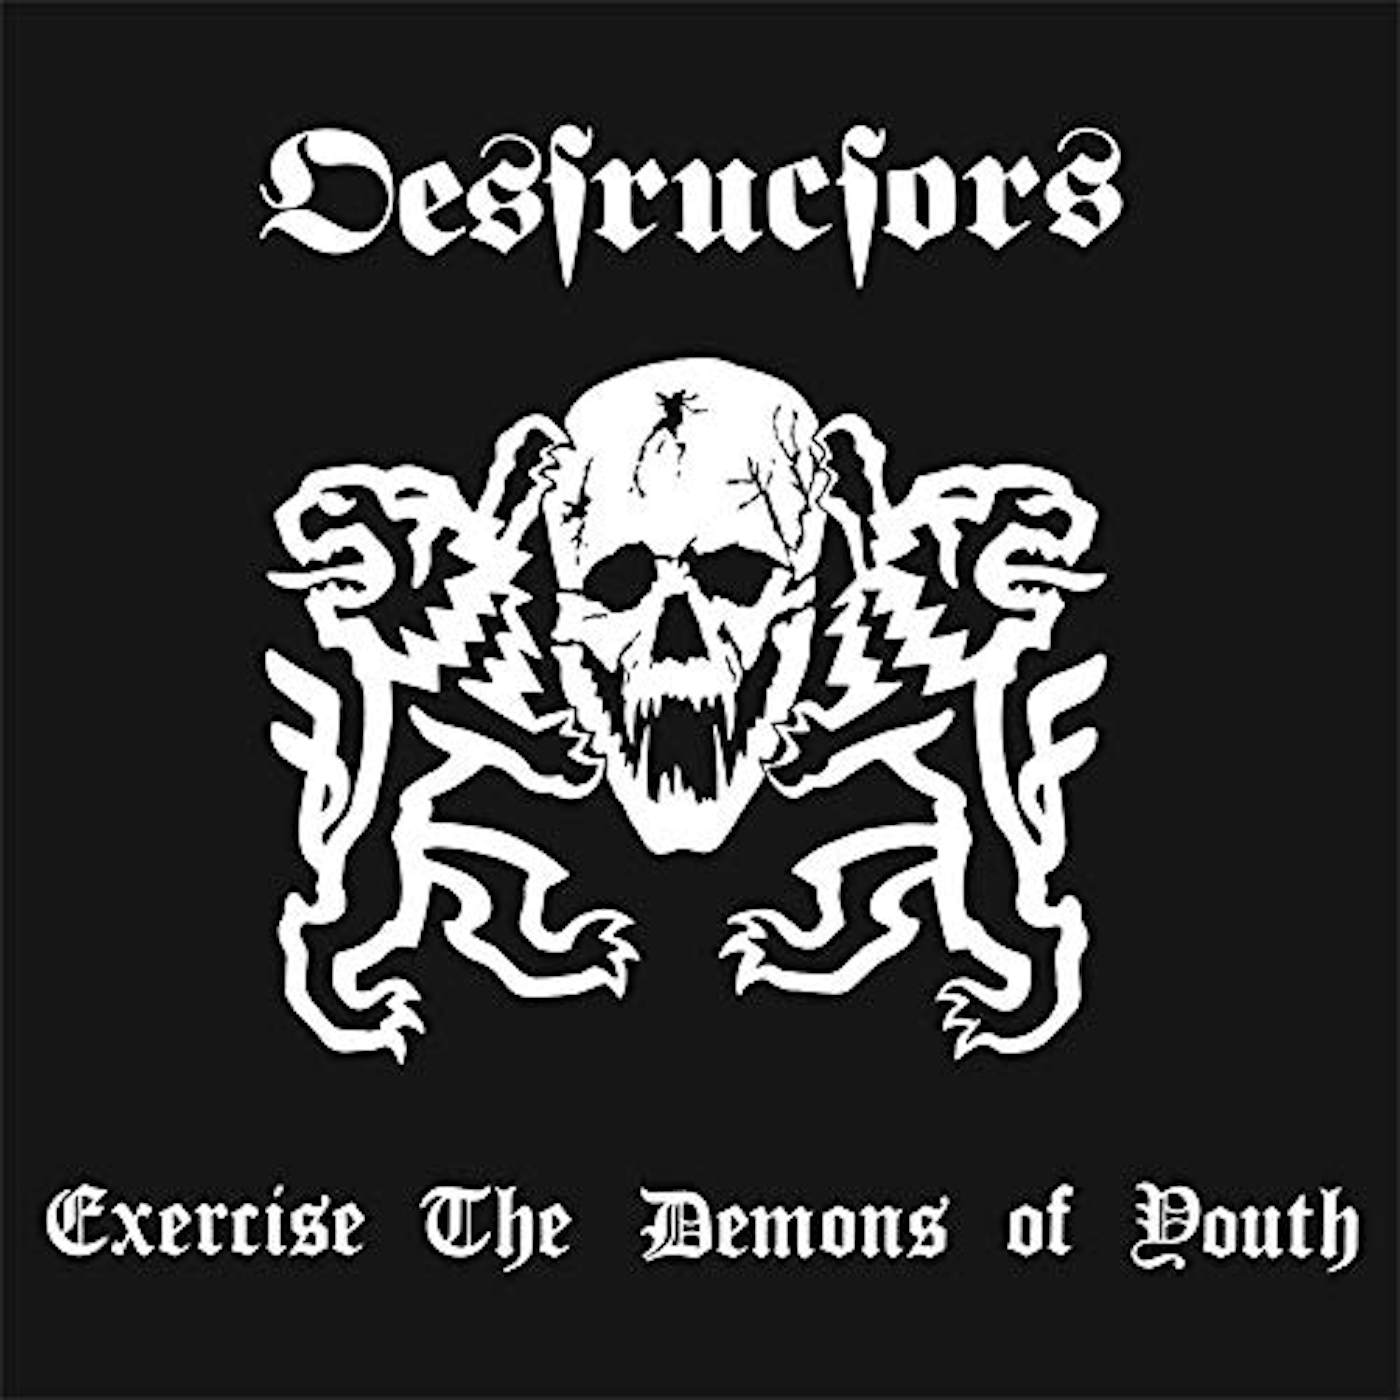 Destructors Exercise the Demons of Youth Vinyl Record